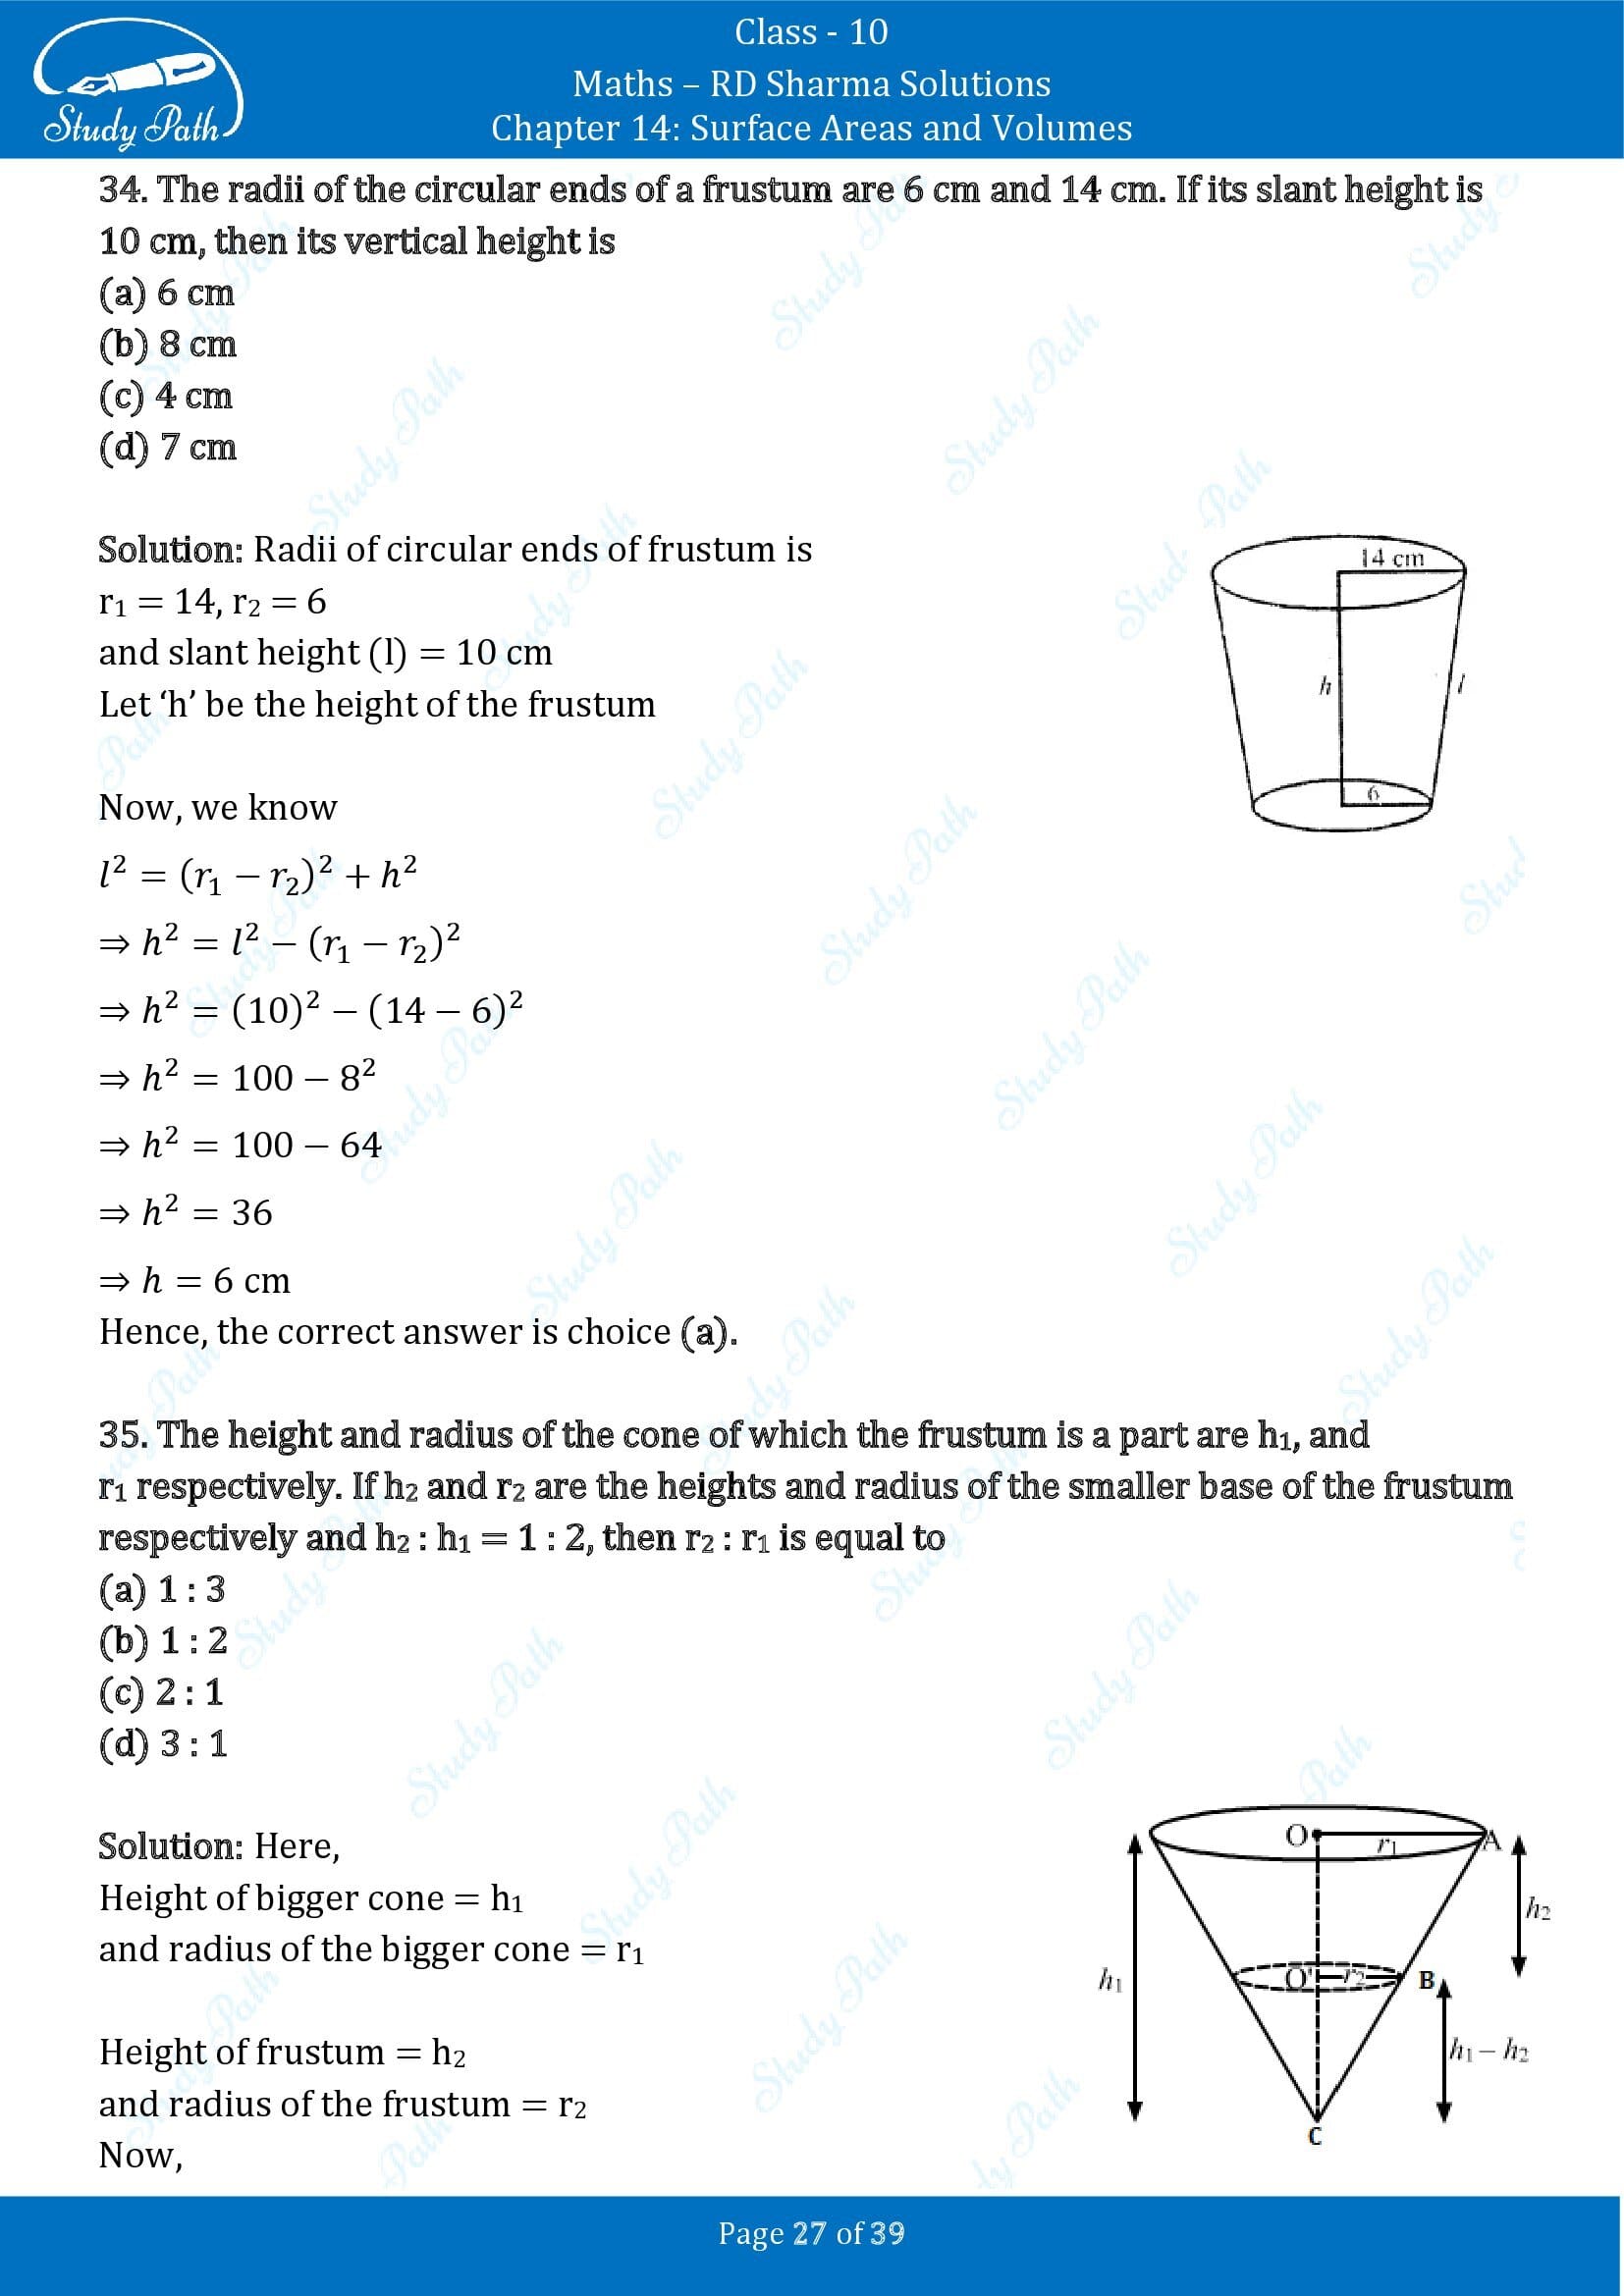 RD Sharma Solutions Class 10 Chapter 14 Surface Areas and Volumes Multiple Choice Question MCQs 00027